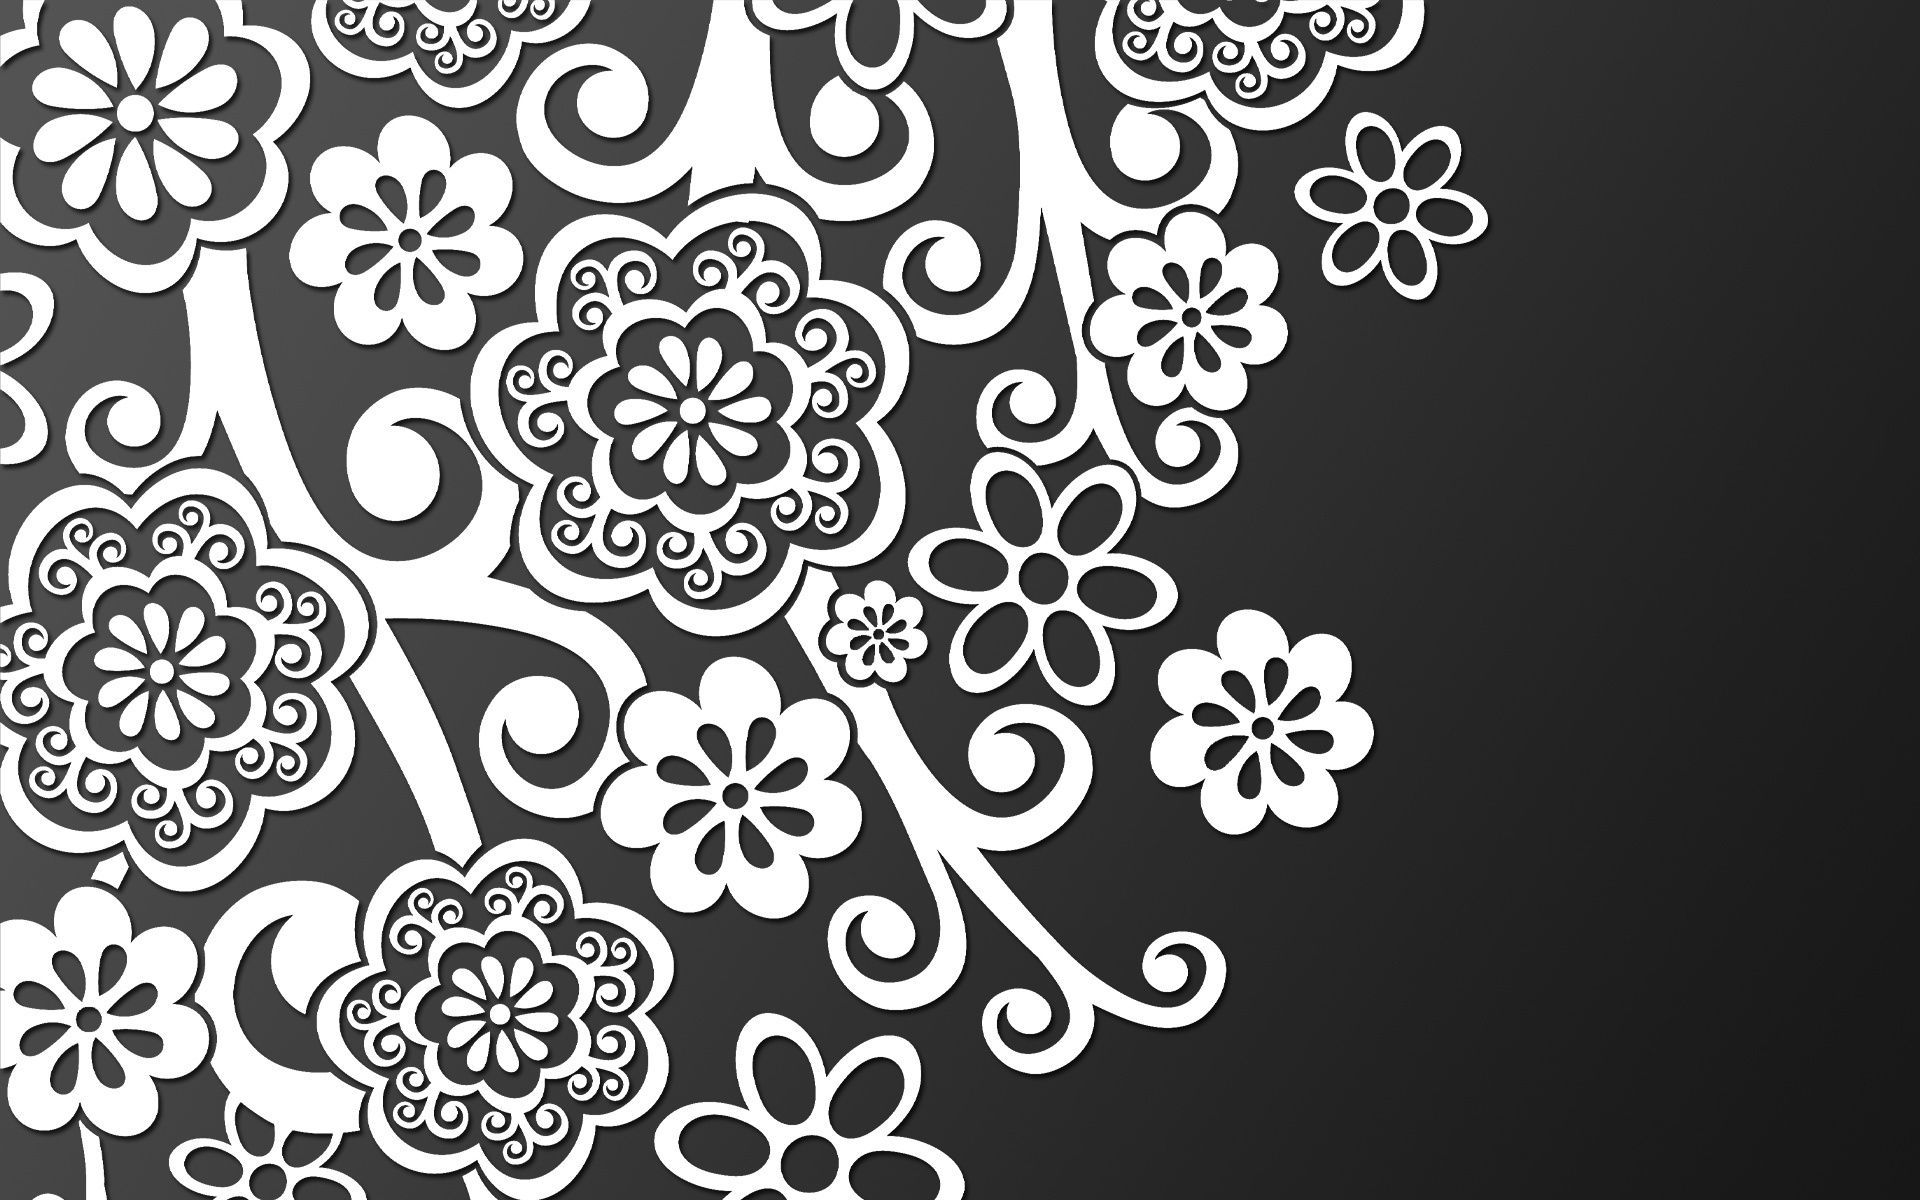 Black and White Lace. Free HD wallpaper. Lace wallpaper, White pattern background, Pattern wallpaper